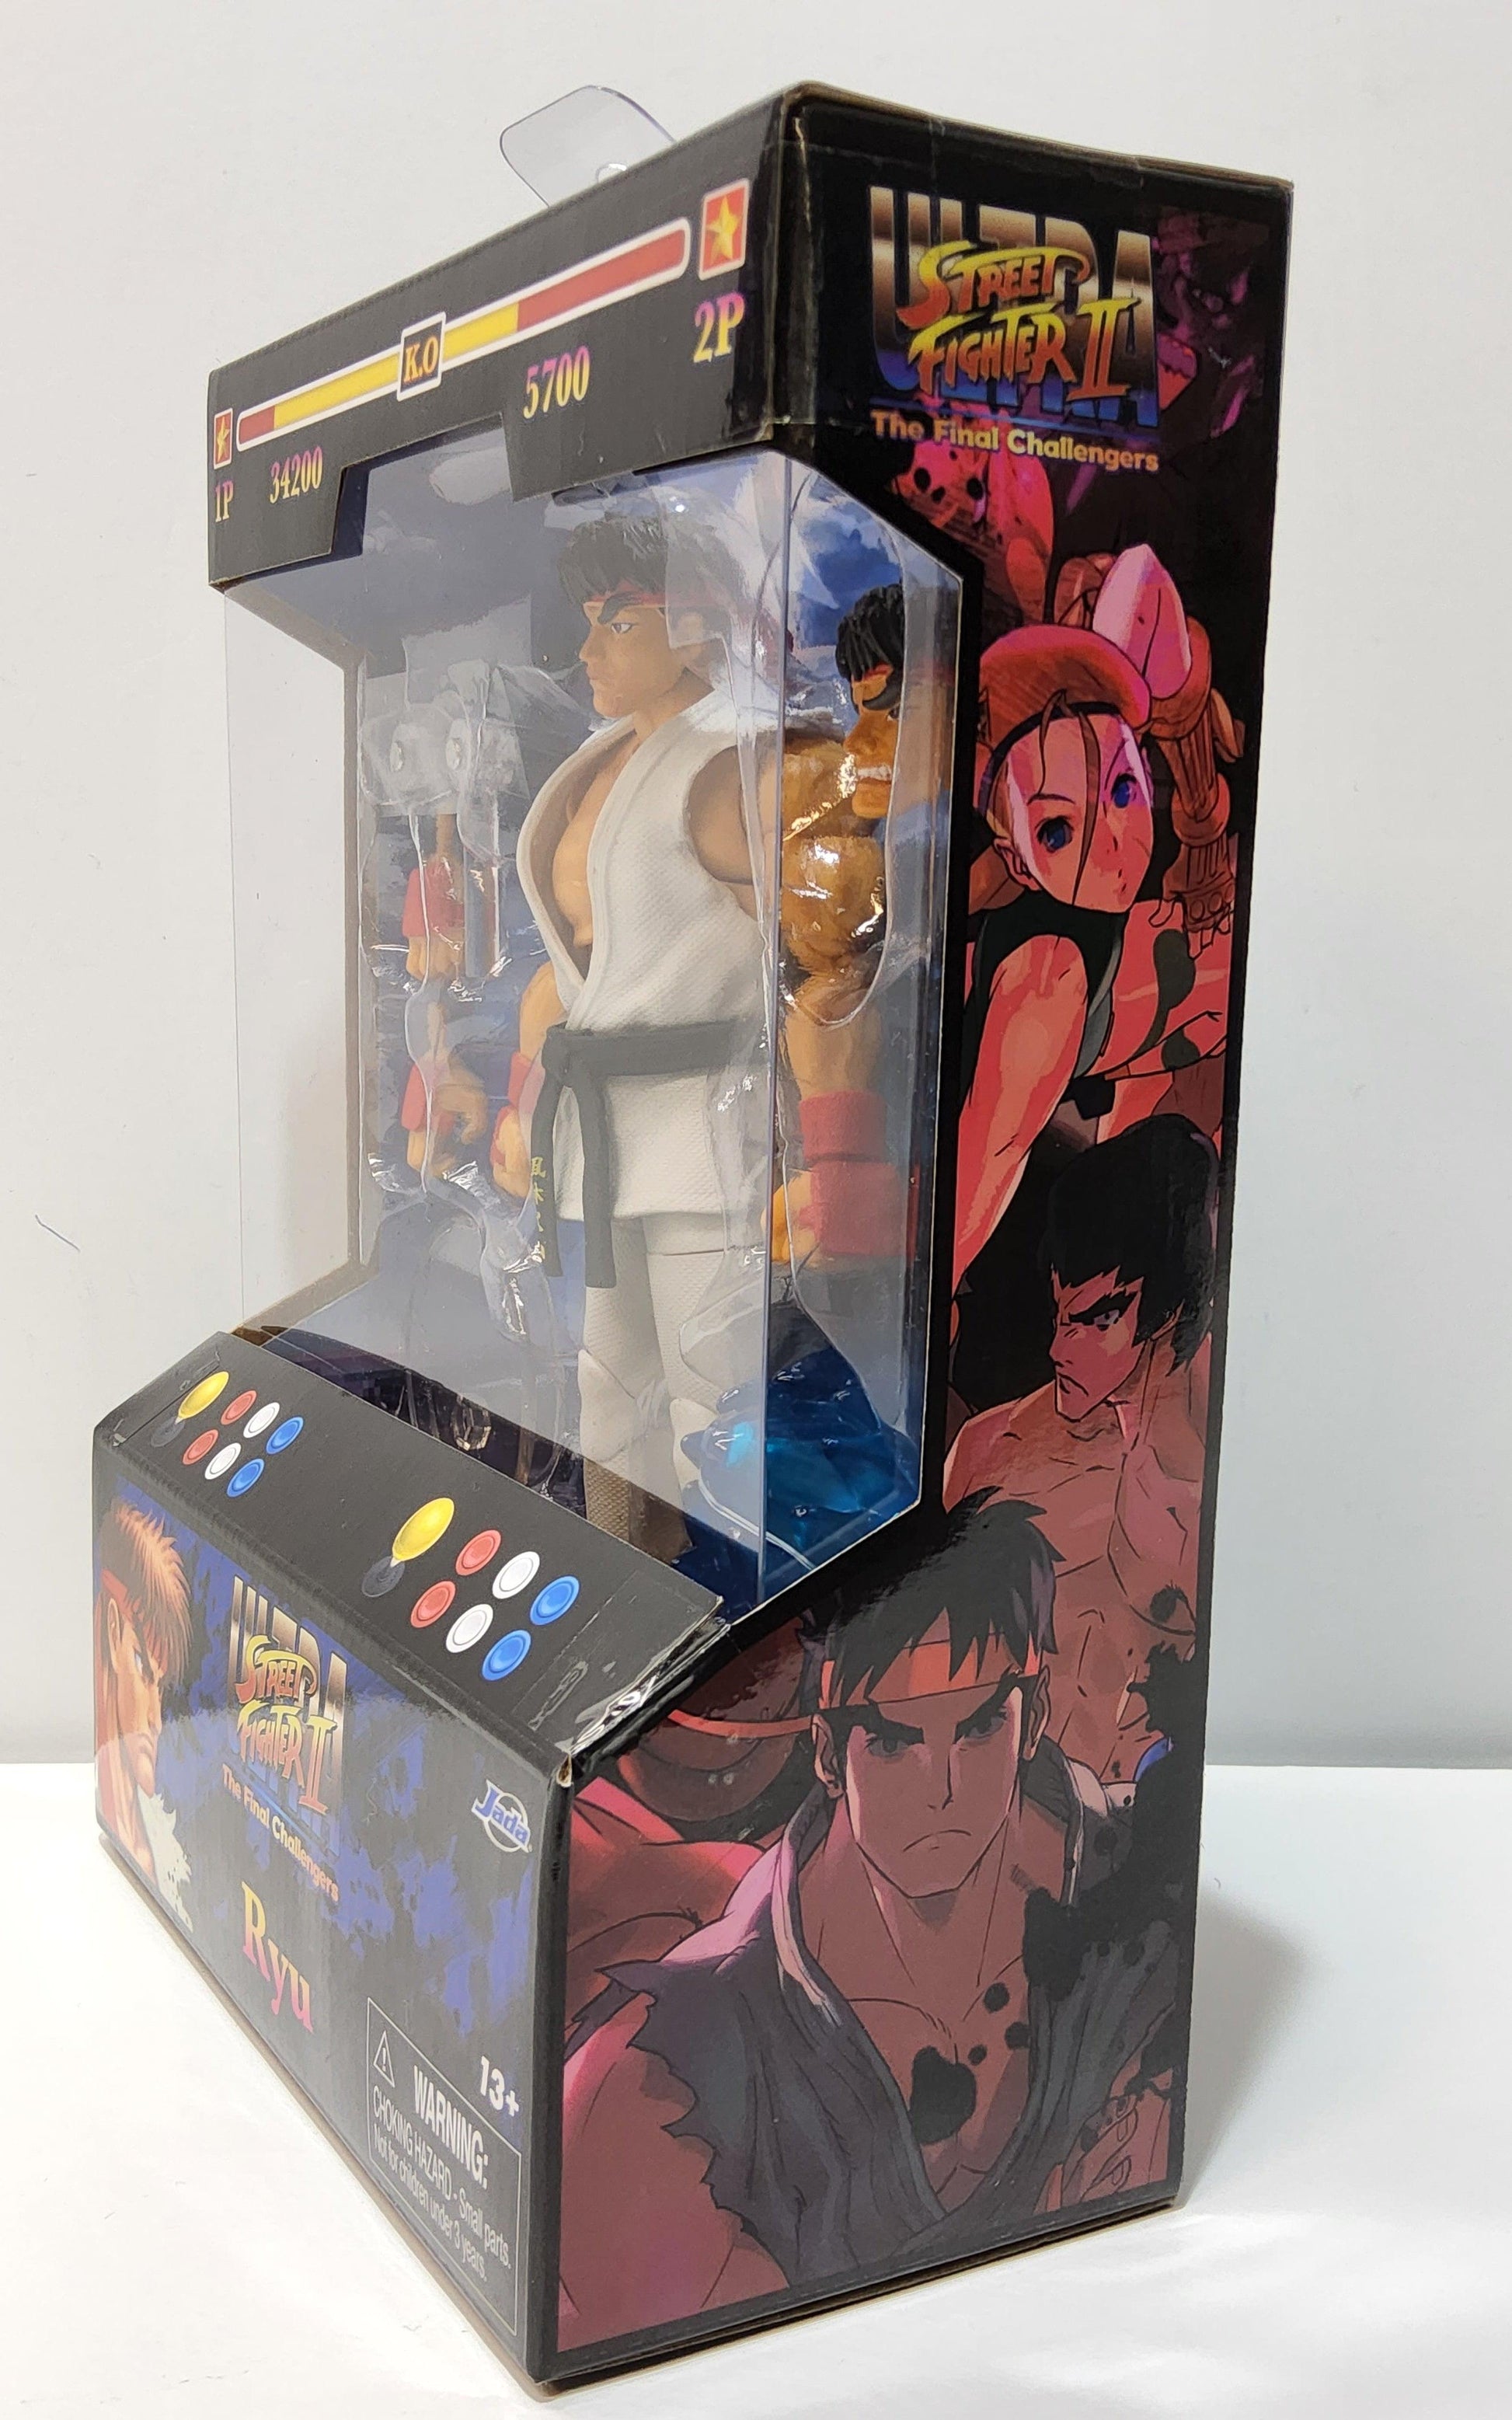 Jada Toys 6” Ryu Action Figure Ultra Street Fighter II The Final Challengers